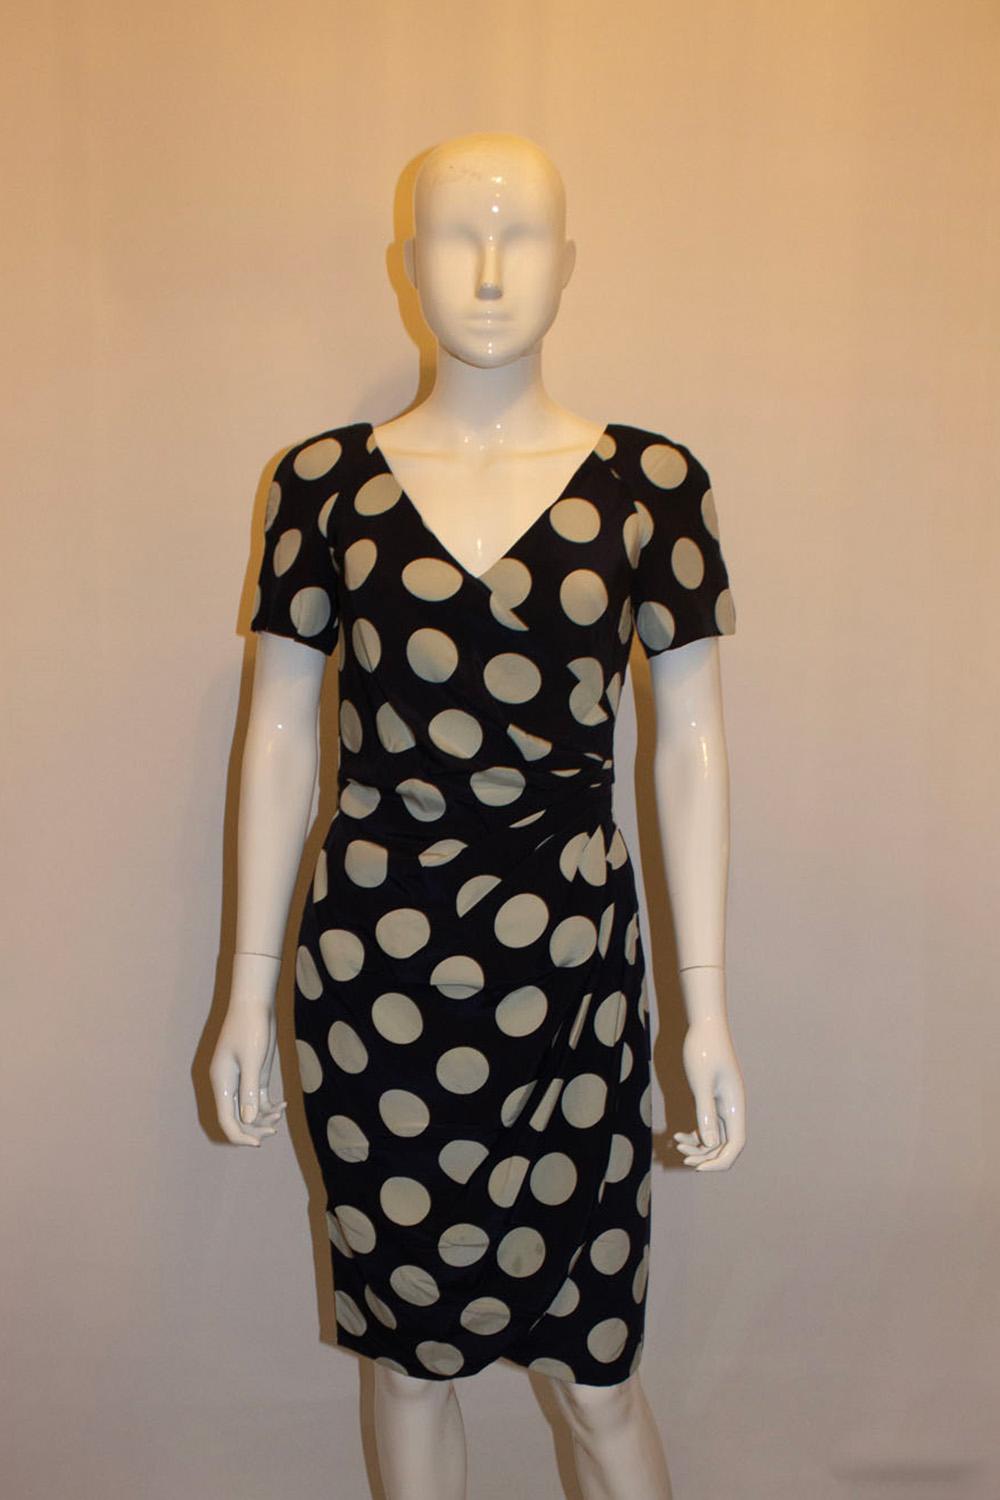 A fun vintage dress by British designer , Bruce Oldfield favorite of Queen Camilla. The dress is in super soft silk, with a blue background and ice blue colour spots.  The dress has a wrap over front and tulip skirt, with short sleaves and a central